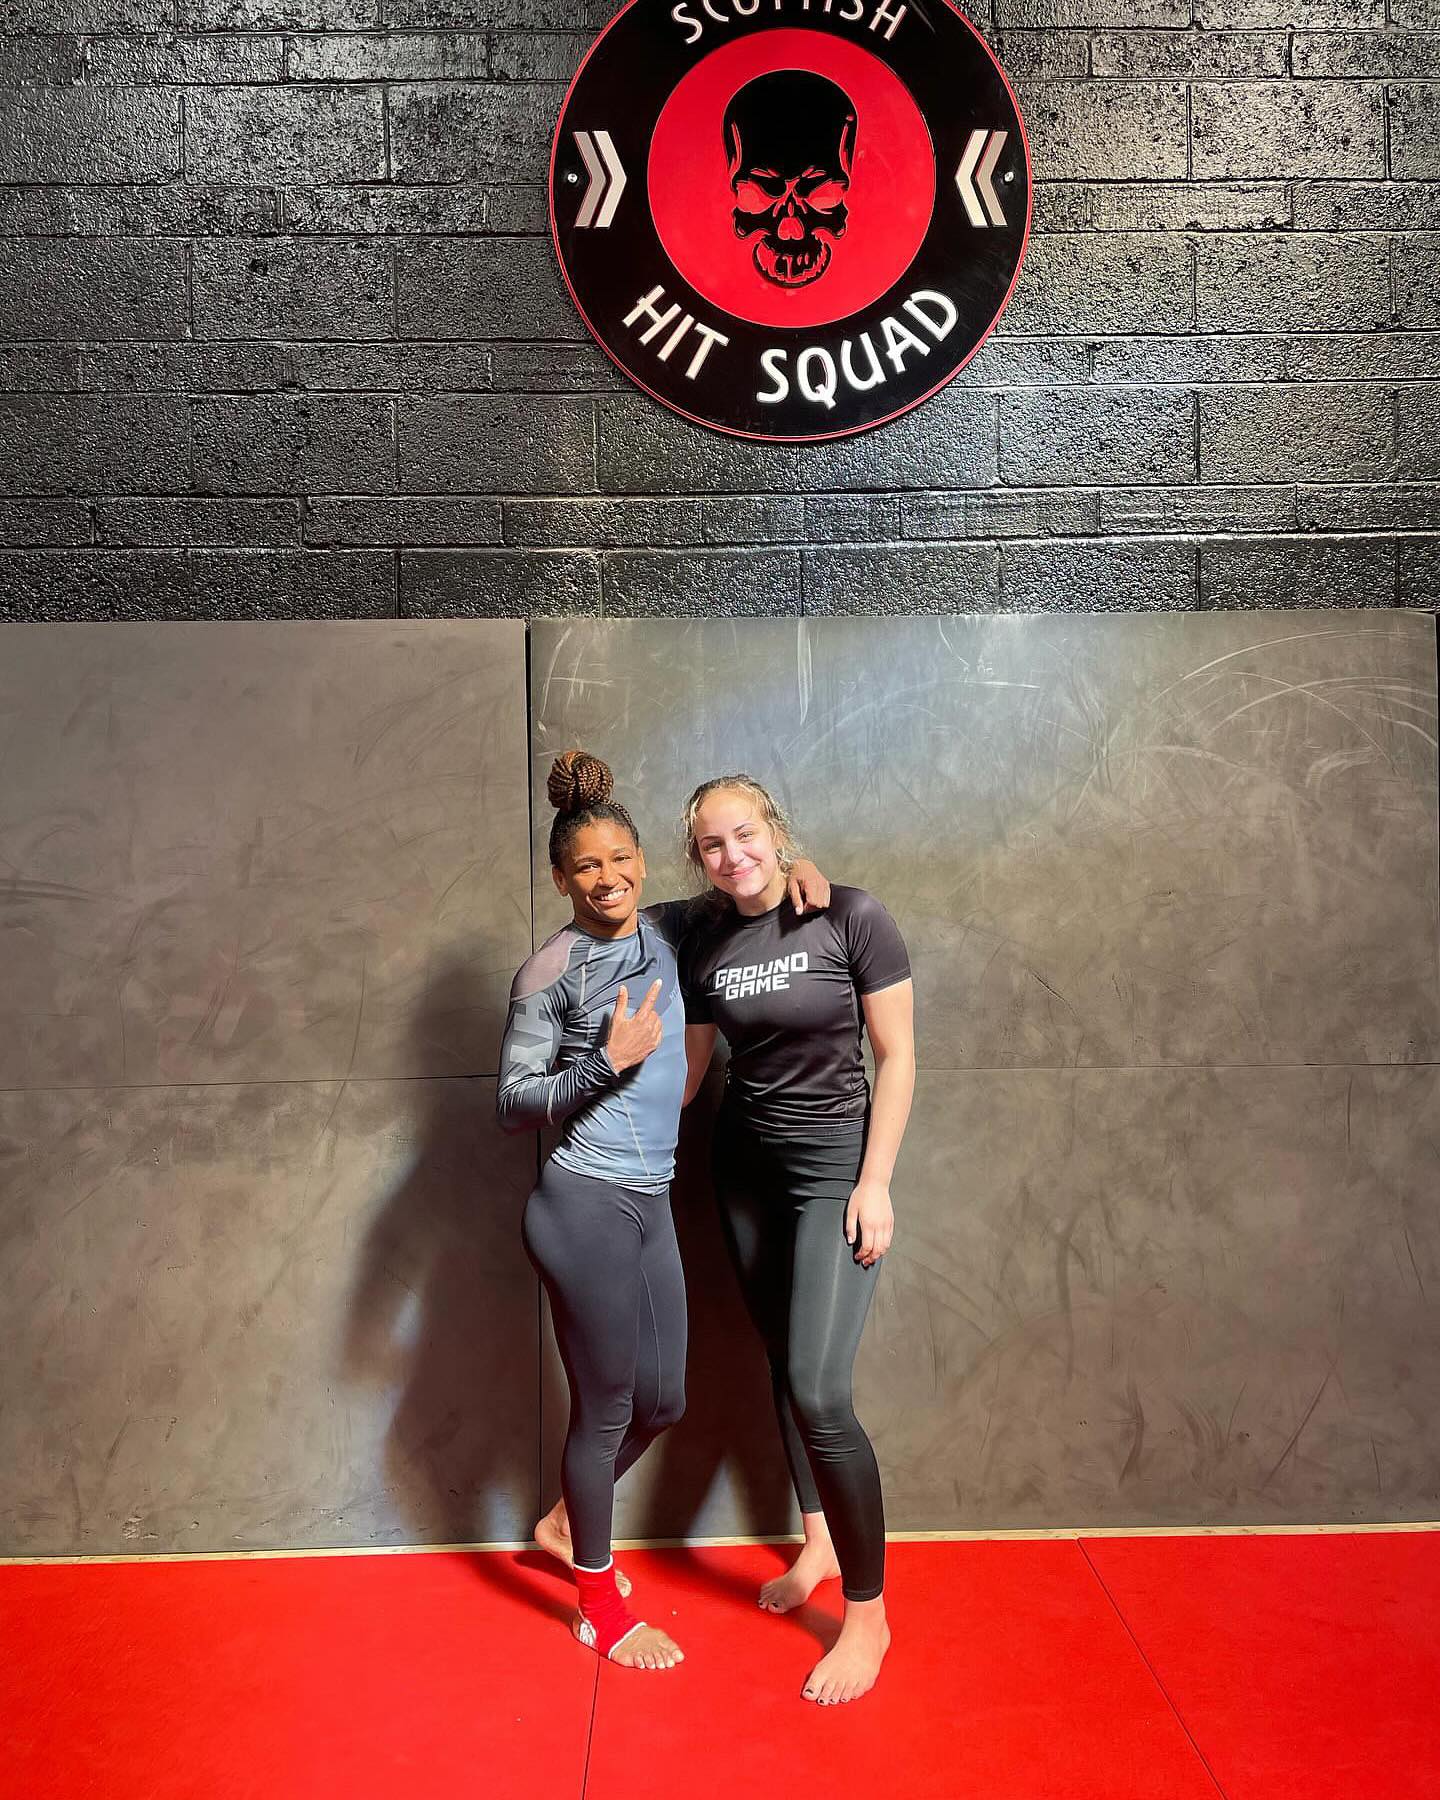 Huge thanks to the folks at @griphouse and @brianmartingallacher for welcoming me into your gyms and keeping me in shape during our trip to #Glasgow. Hope to get more training in when we come back in Sept! #MMA #Scotland